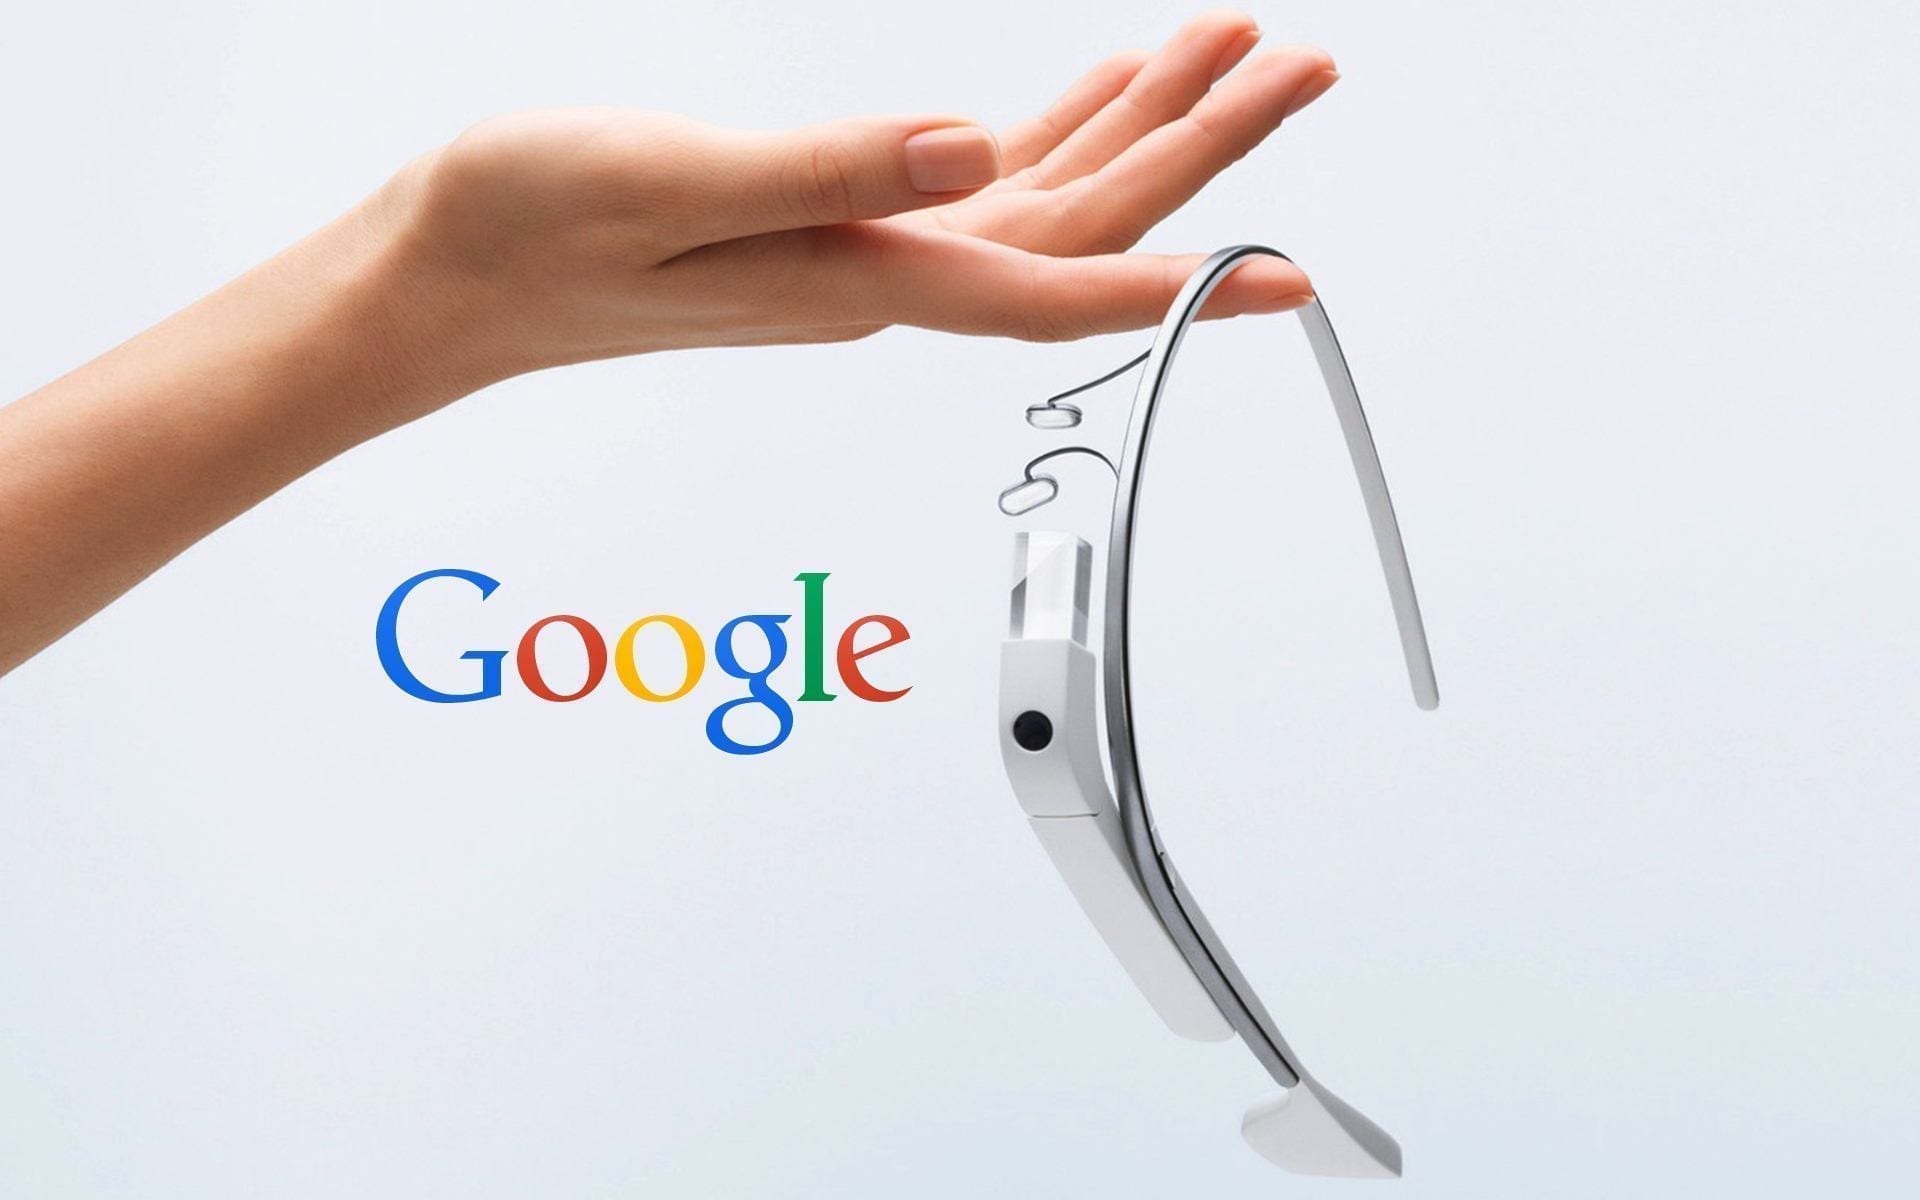 Google glass meets organs-on-chips